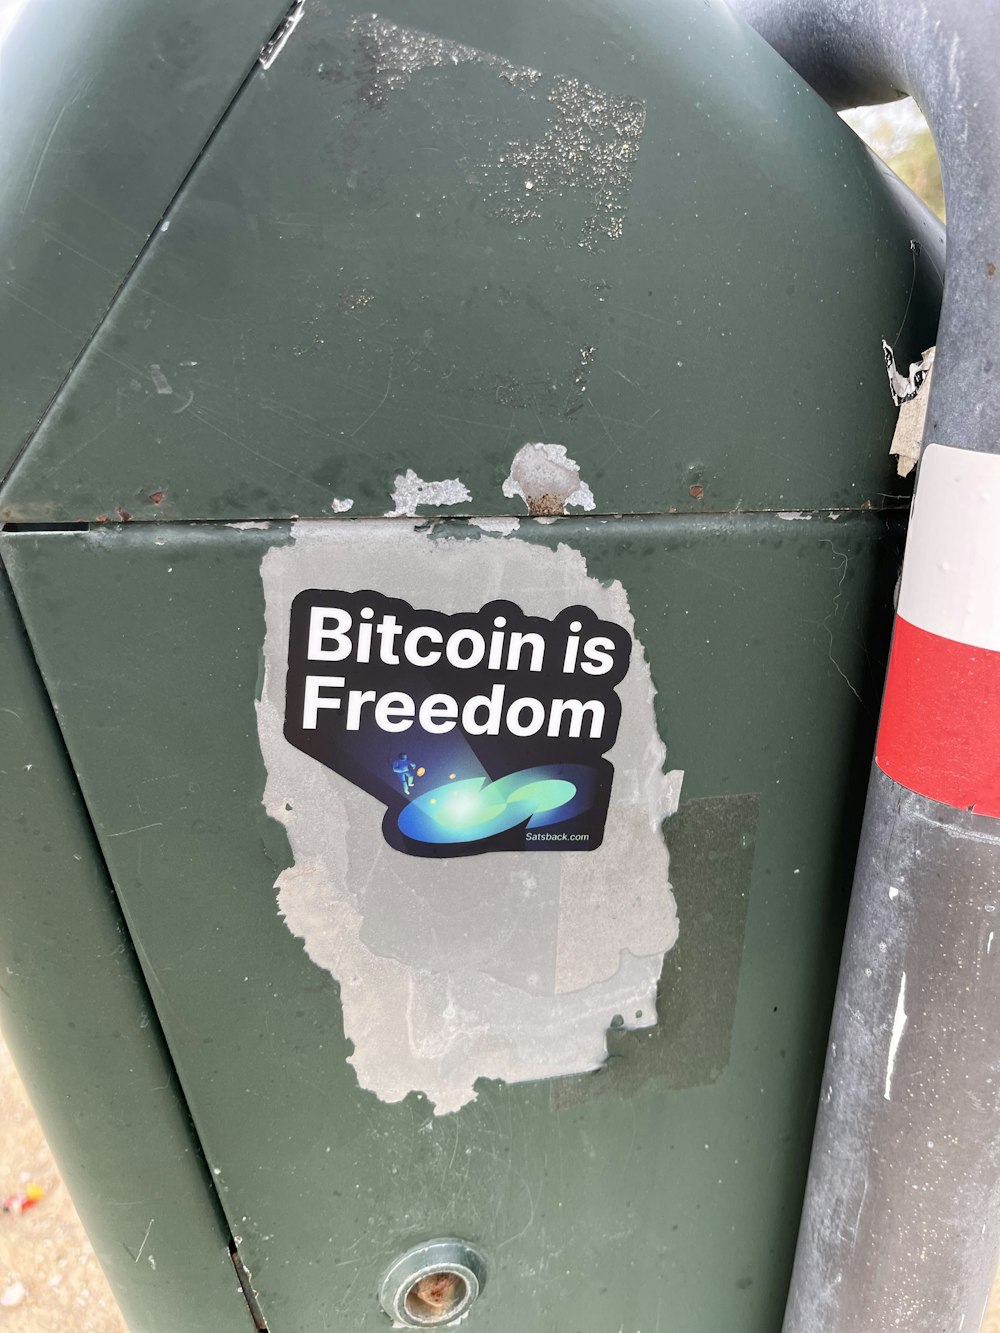 a sticker on the side of a metal object